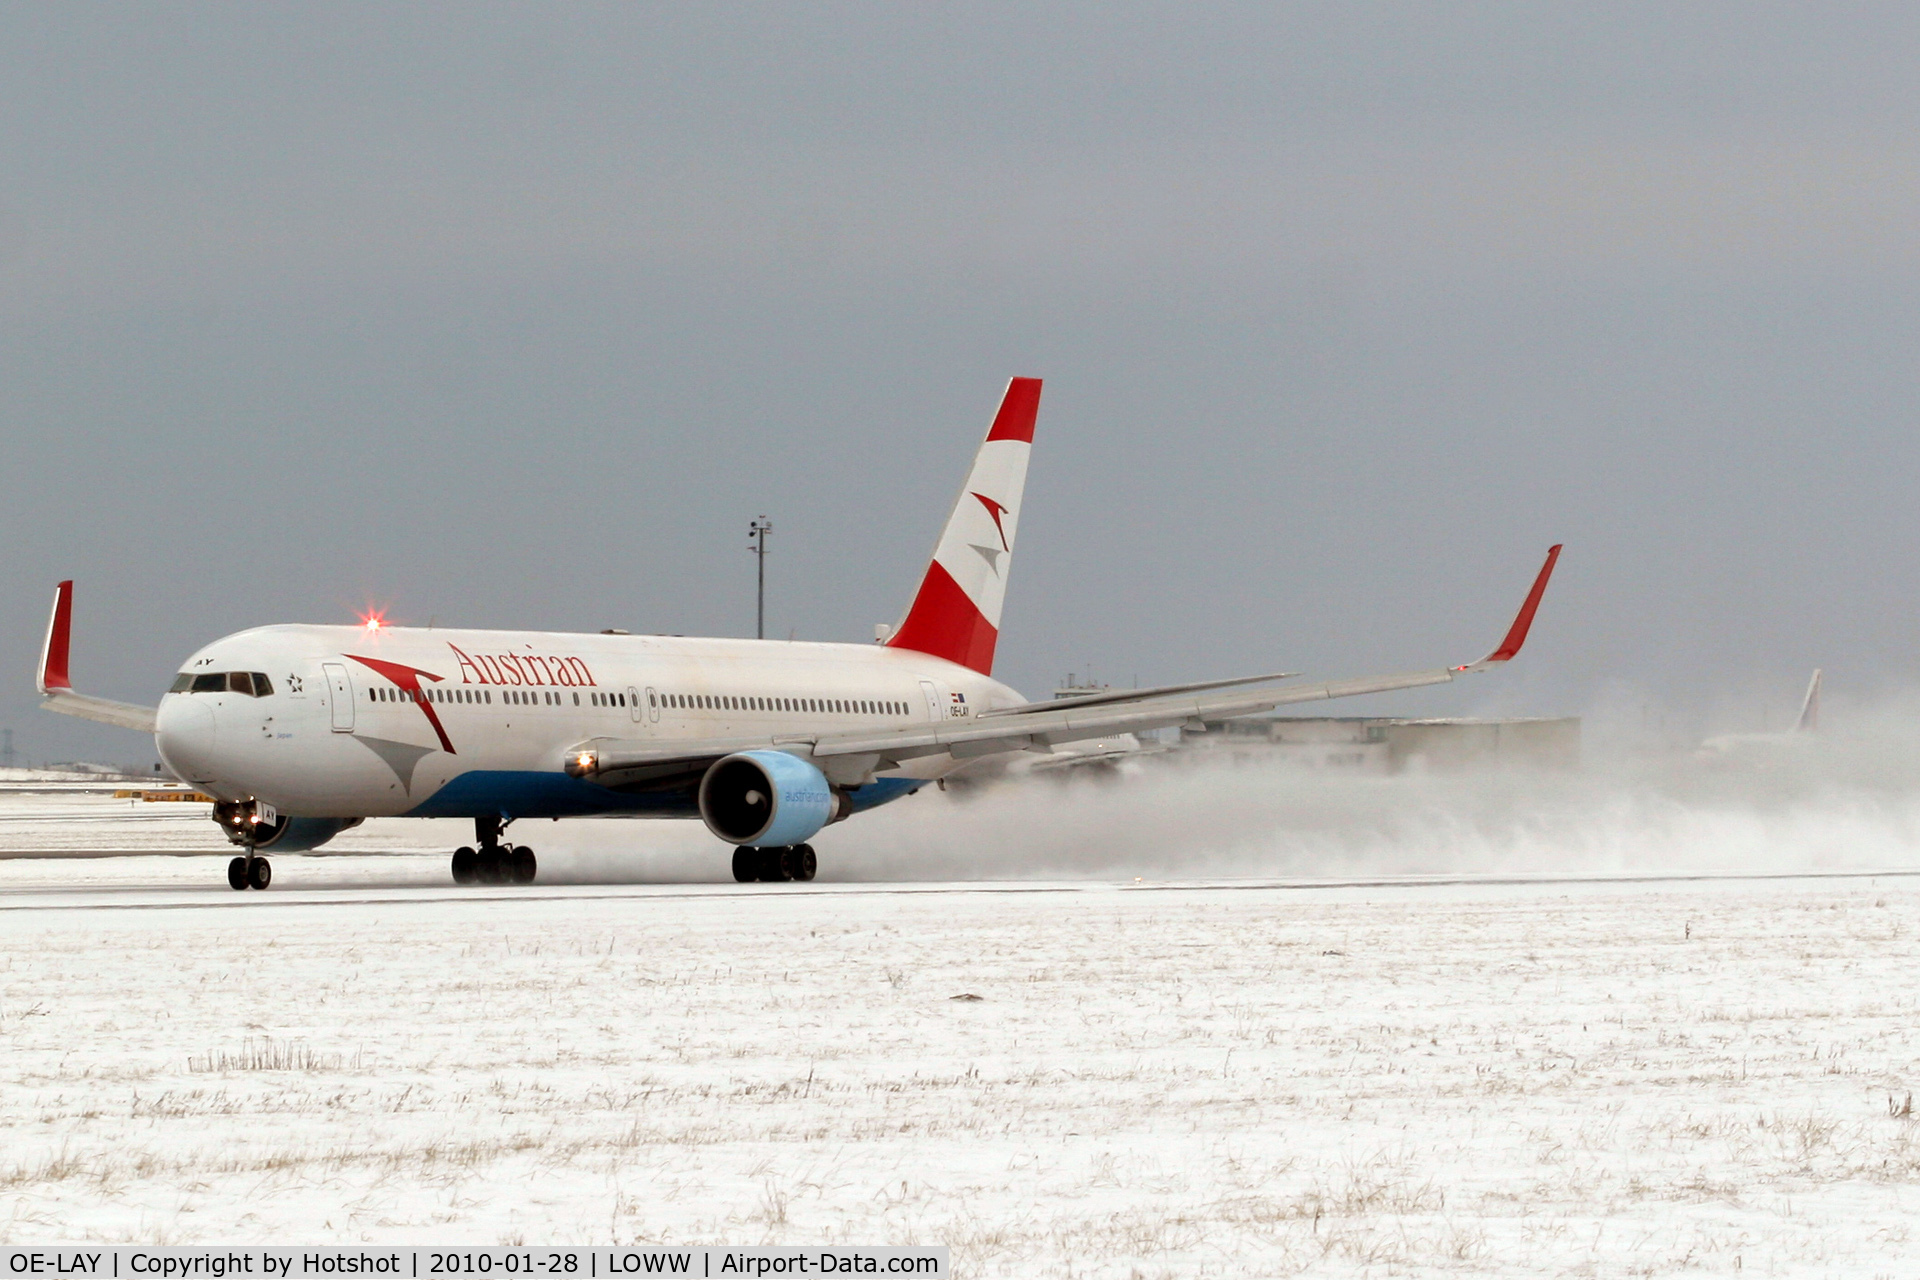 OE-LAY, 1998 Boeing 767-3Z9/ER C/N 29867, Departing from a snow-covered runway